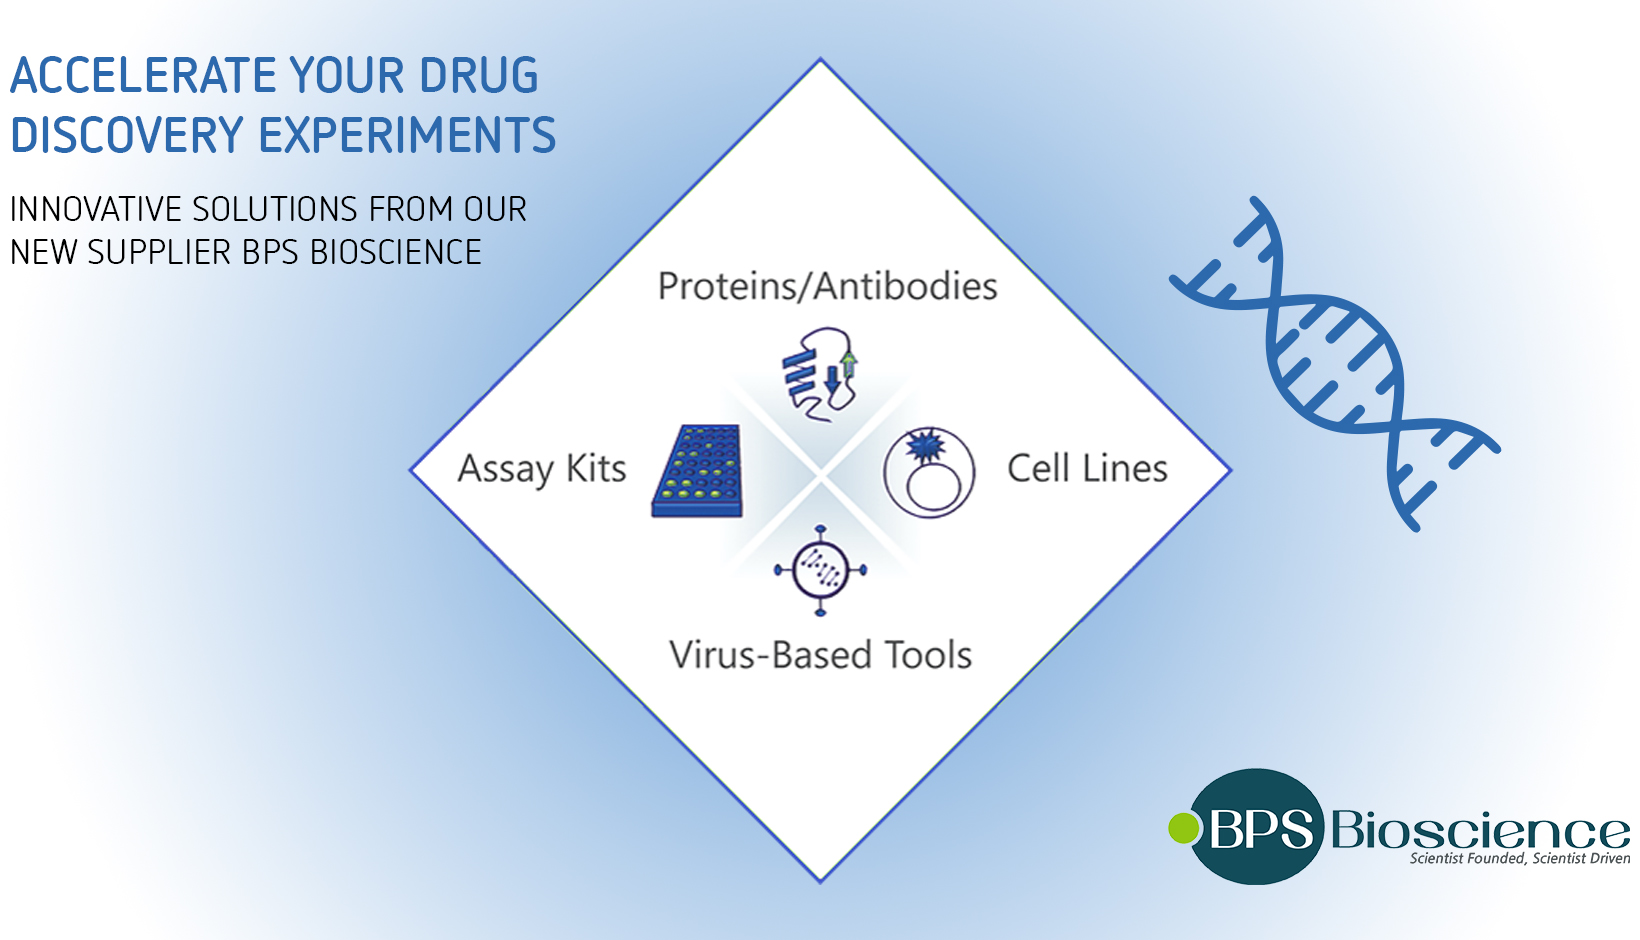 Innovative Solutions from our new supplier BPS Bioscience